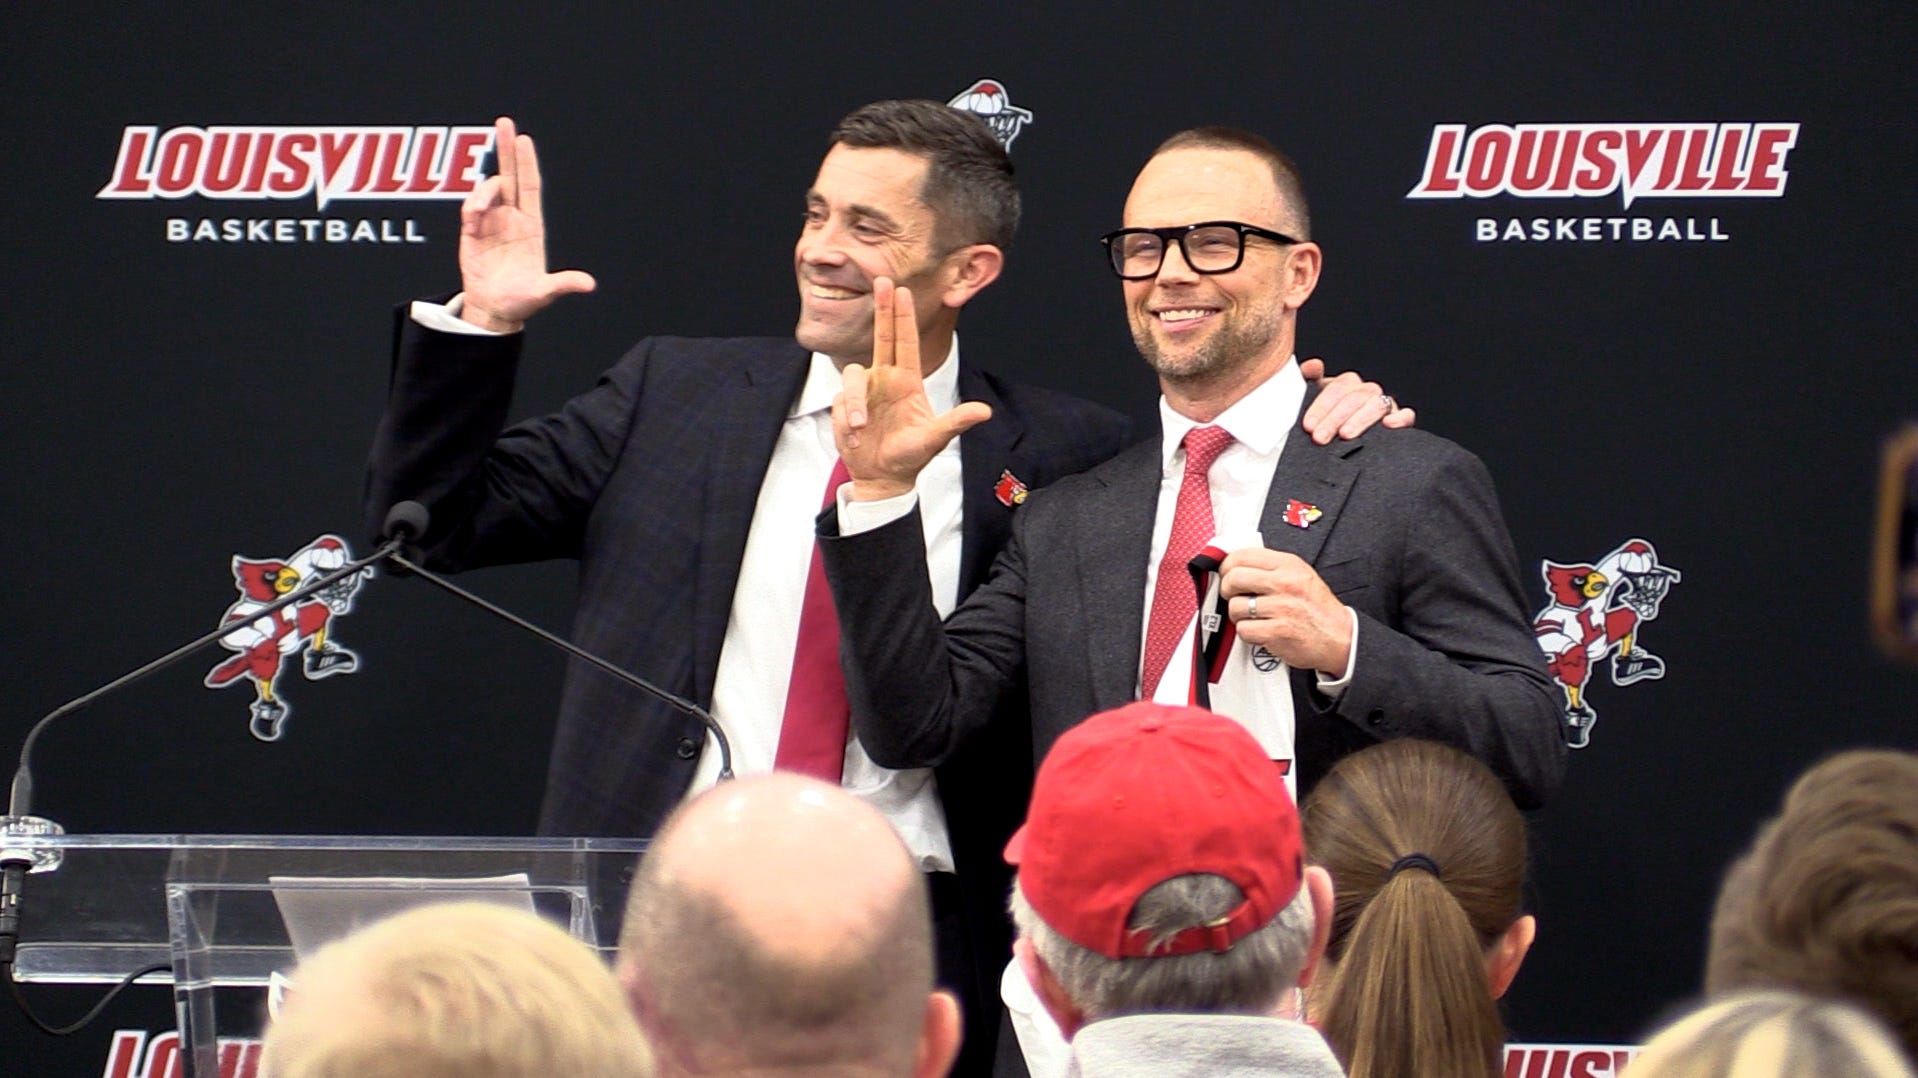 WATCH: "L's Up!" Louisville basketball introduces Pat Kelsey as head coach